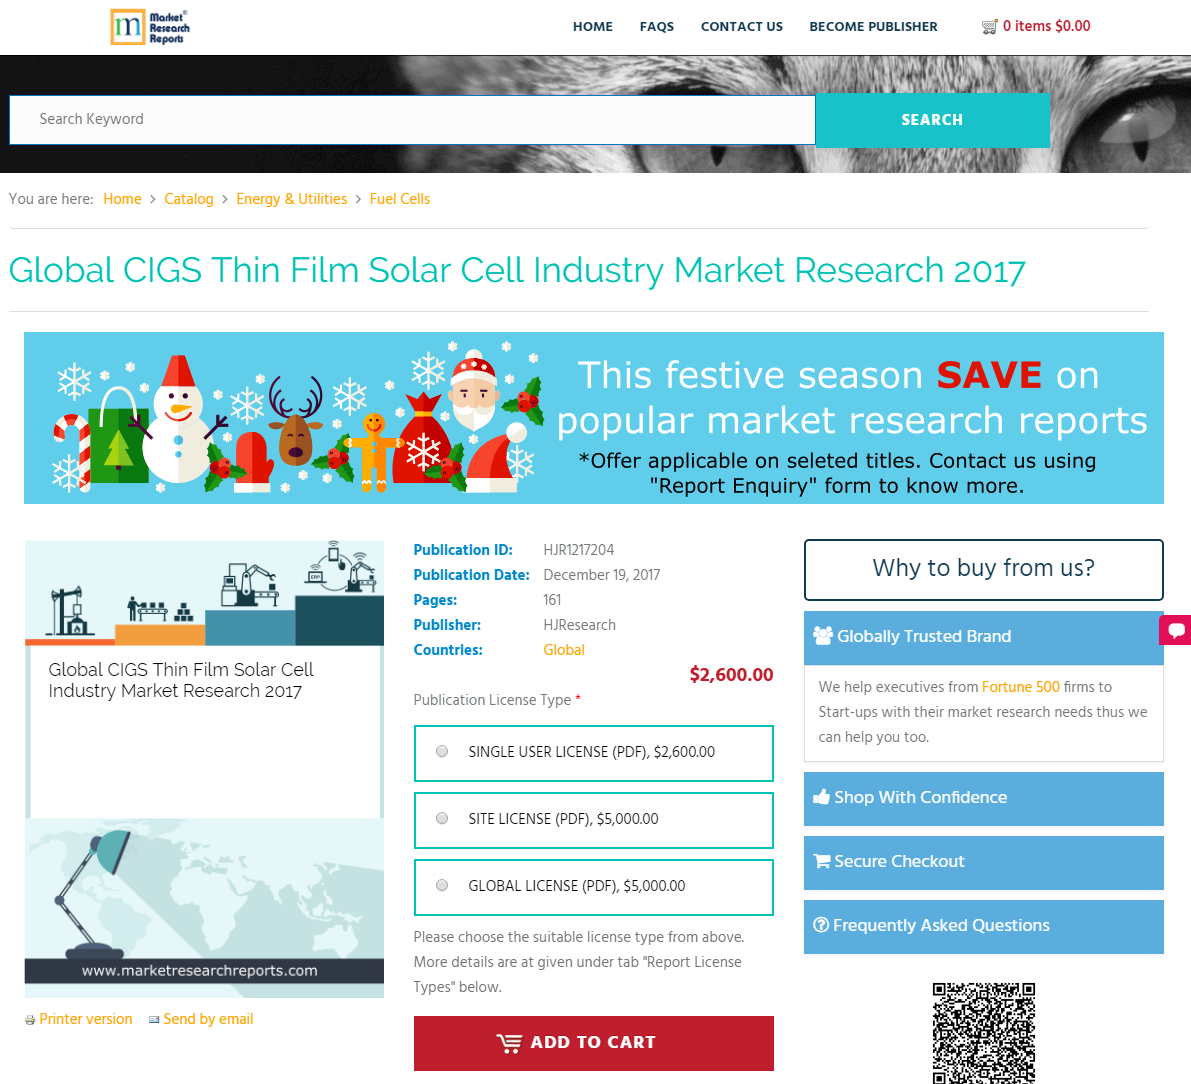 Global CIGS Thin Film Solar Cell Industry Market Research'